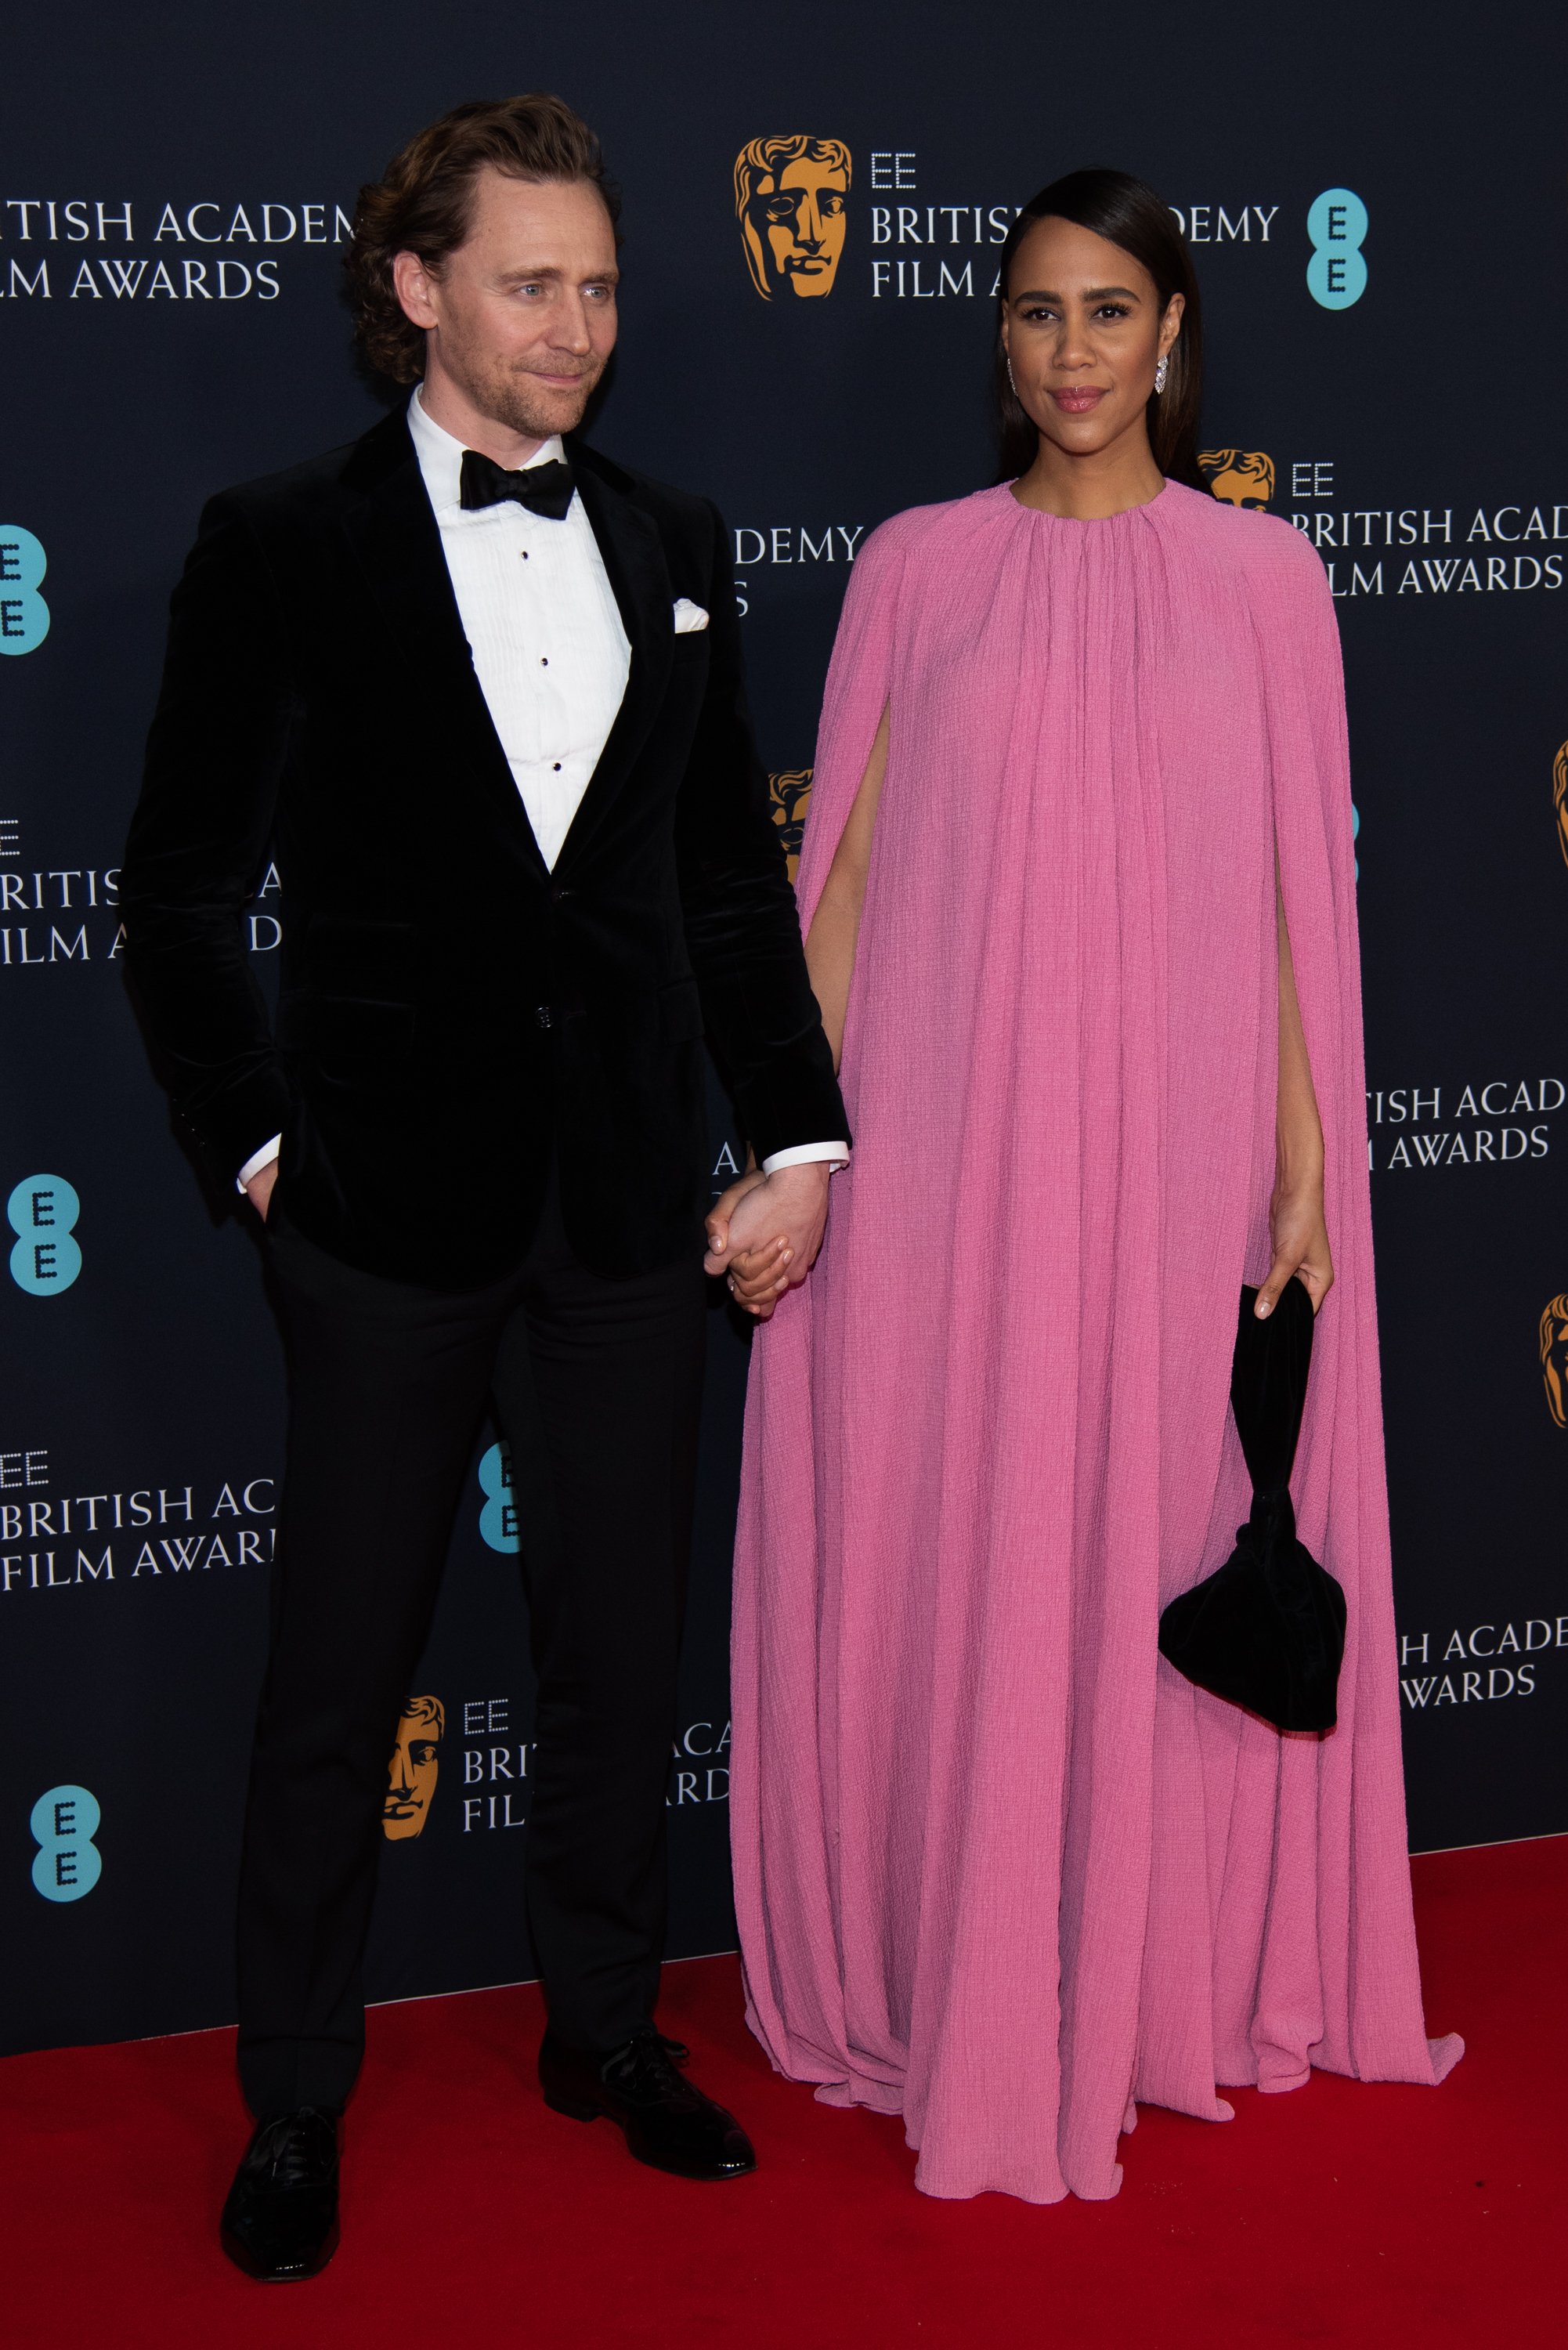  Tom Hiddleston and Zawe Ashton during the EE British Academy Film Awards 2022 dinner red carpet arrivals in London, England on March 13, 2022 | Source: Getty Images